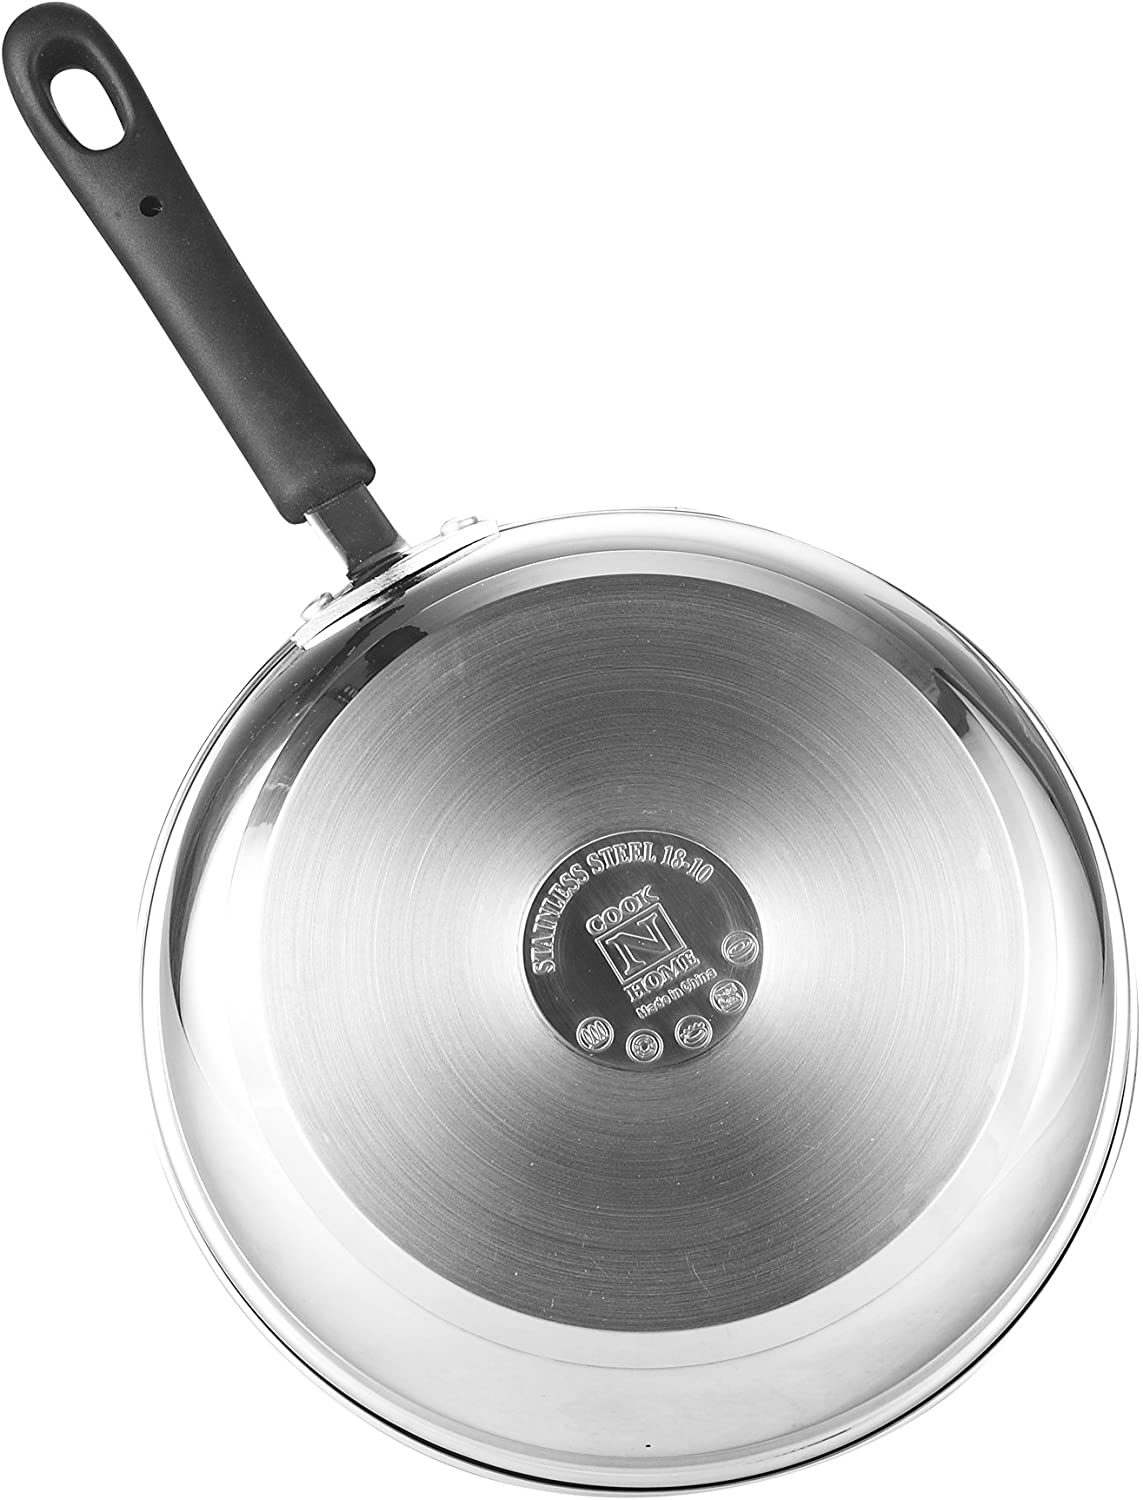 Cook N Home Saucepan Sauce Pot with Lid 1 Quart Stainless Steel